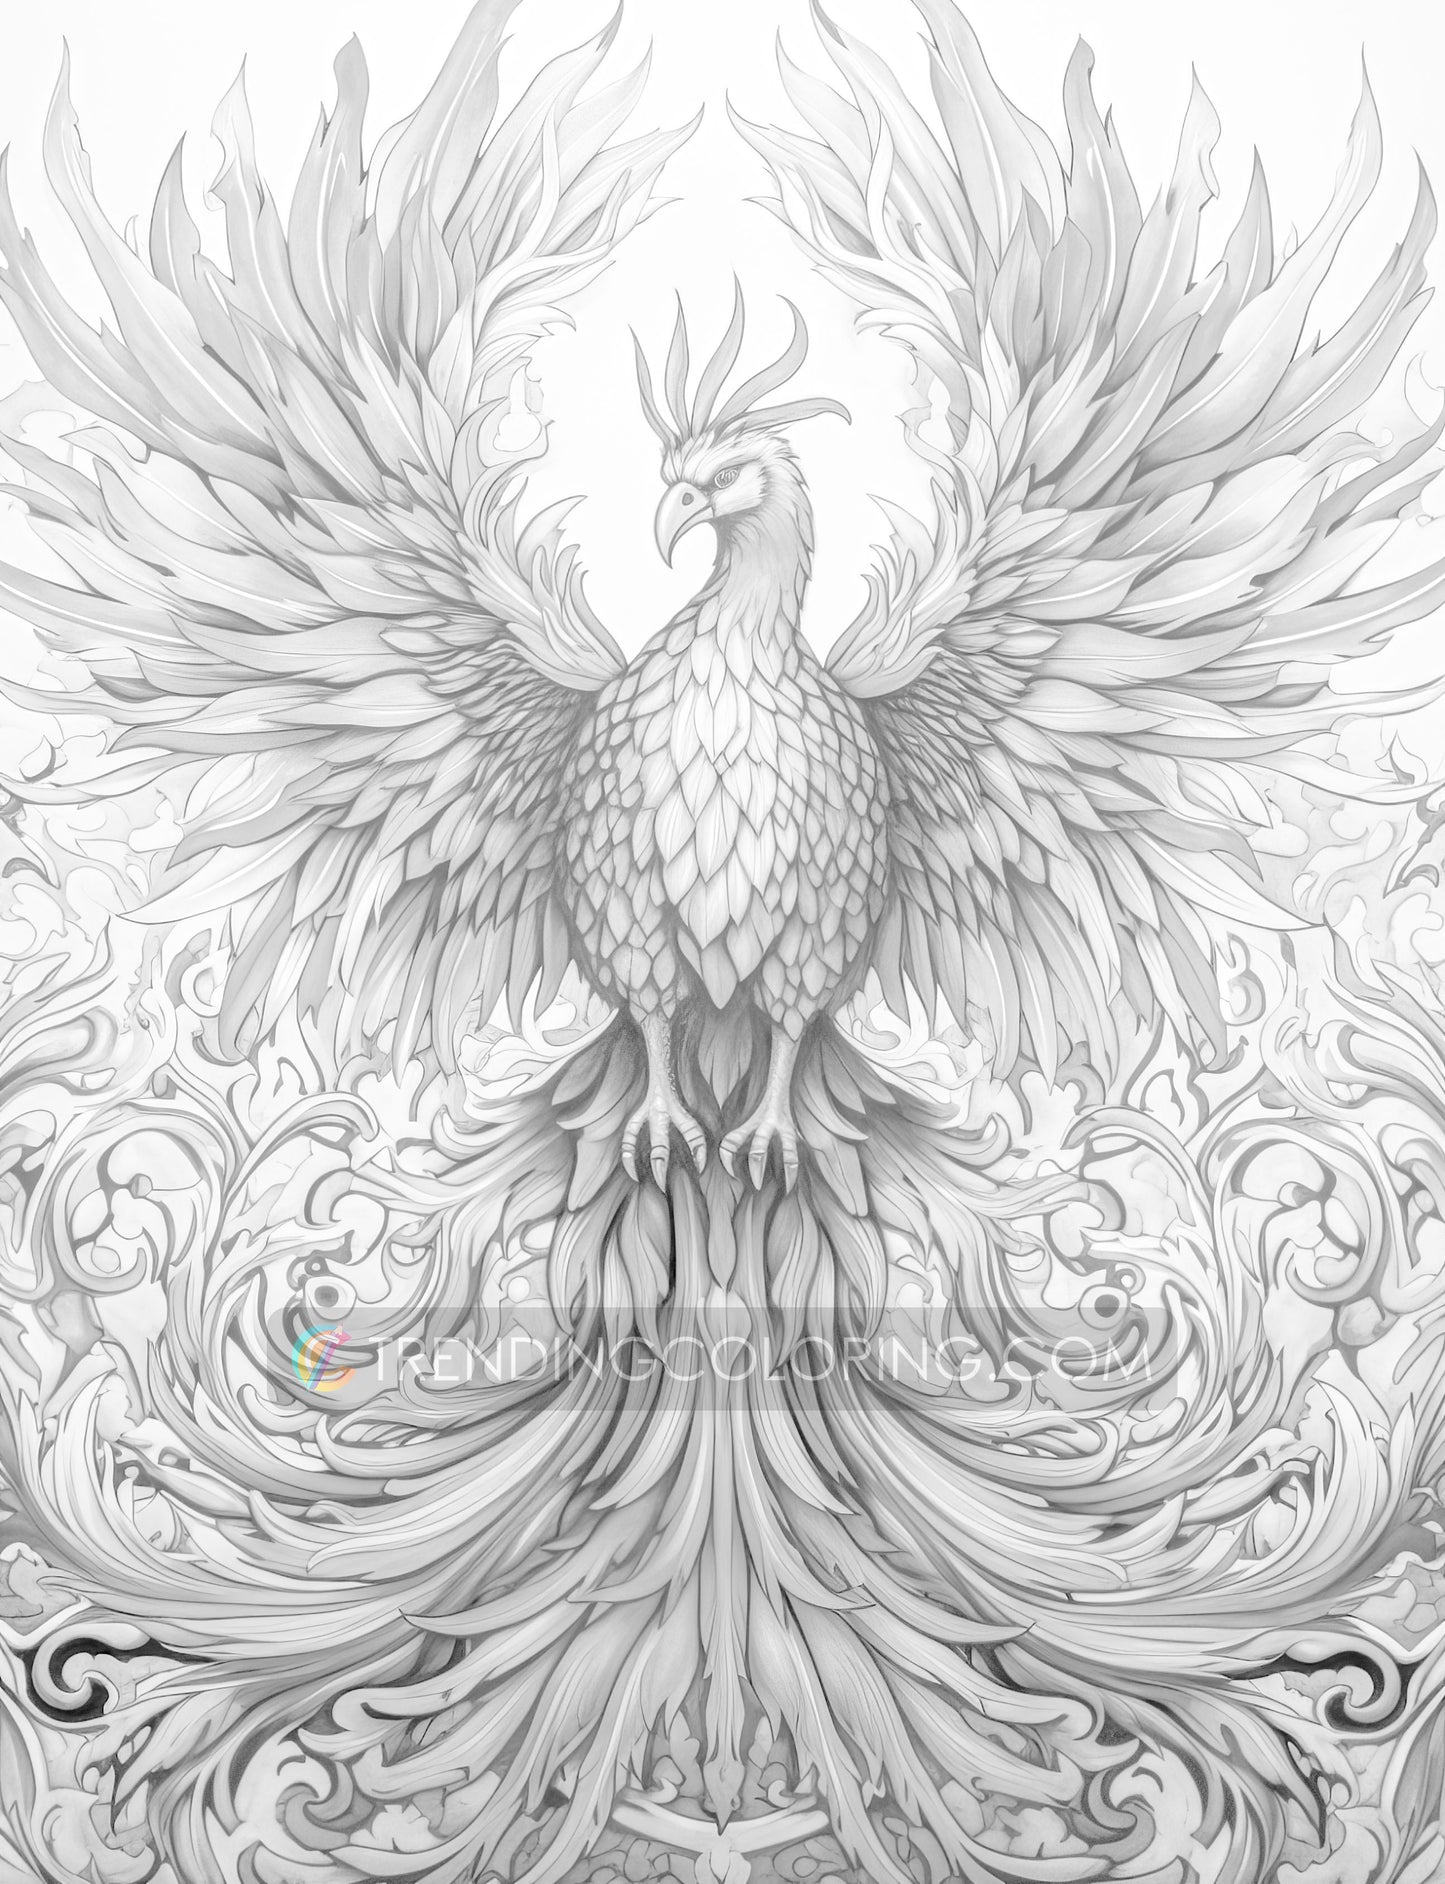 25 Mythical Phoenix Grayscale Coloring Pages - Instant Download - Printable PDF Dark/Light